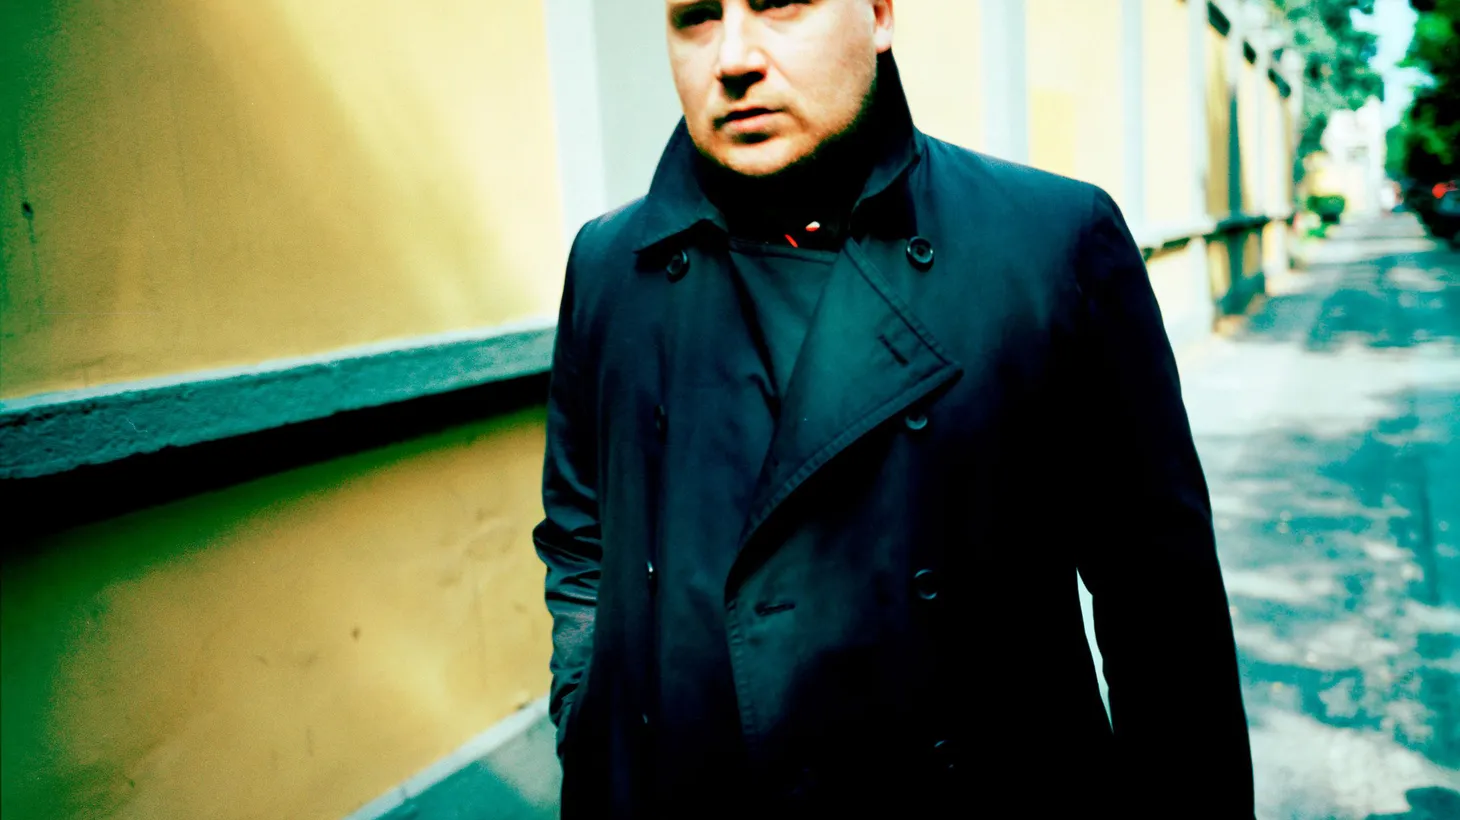 Icelandic pianist Jóhann Jóhannsson composes a range of elegant music from minimalist to baroque with cinematic overtones.